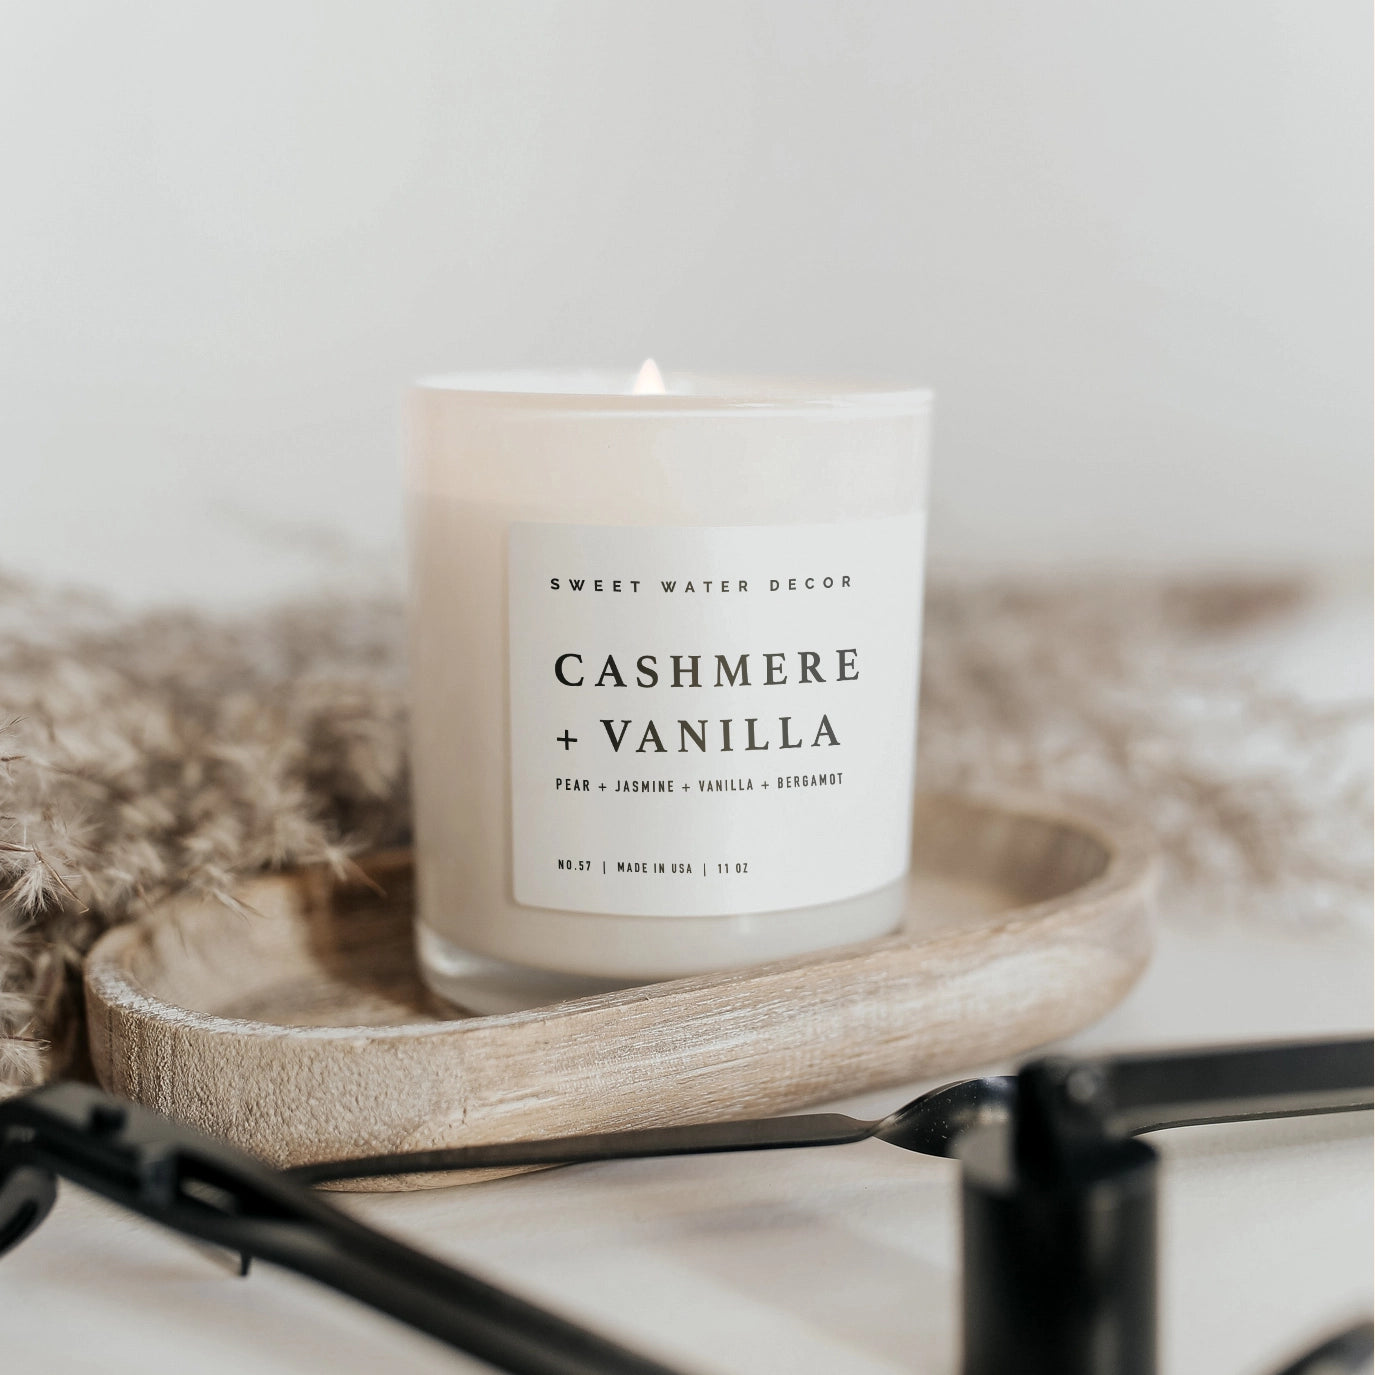 Cashmere and vanilla soy candle in white jar on wooden tray. 